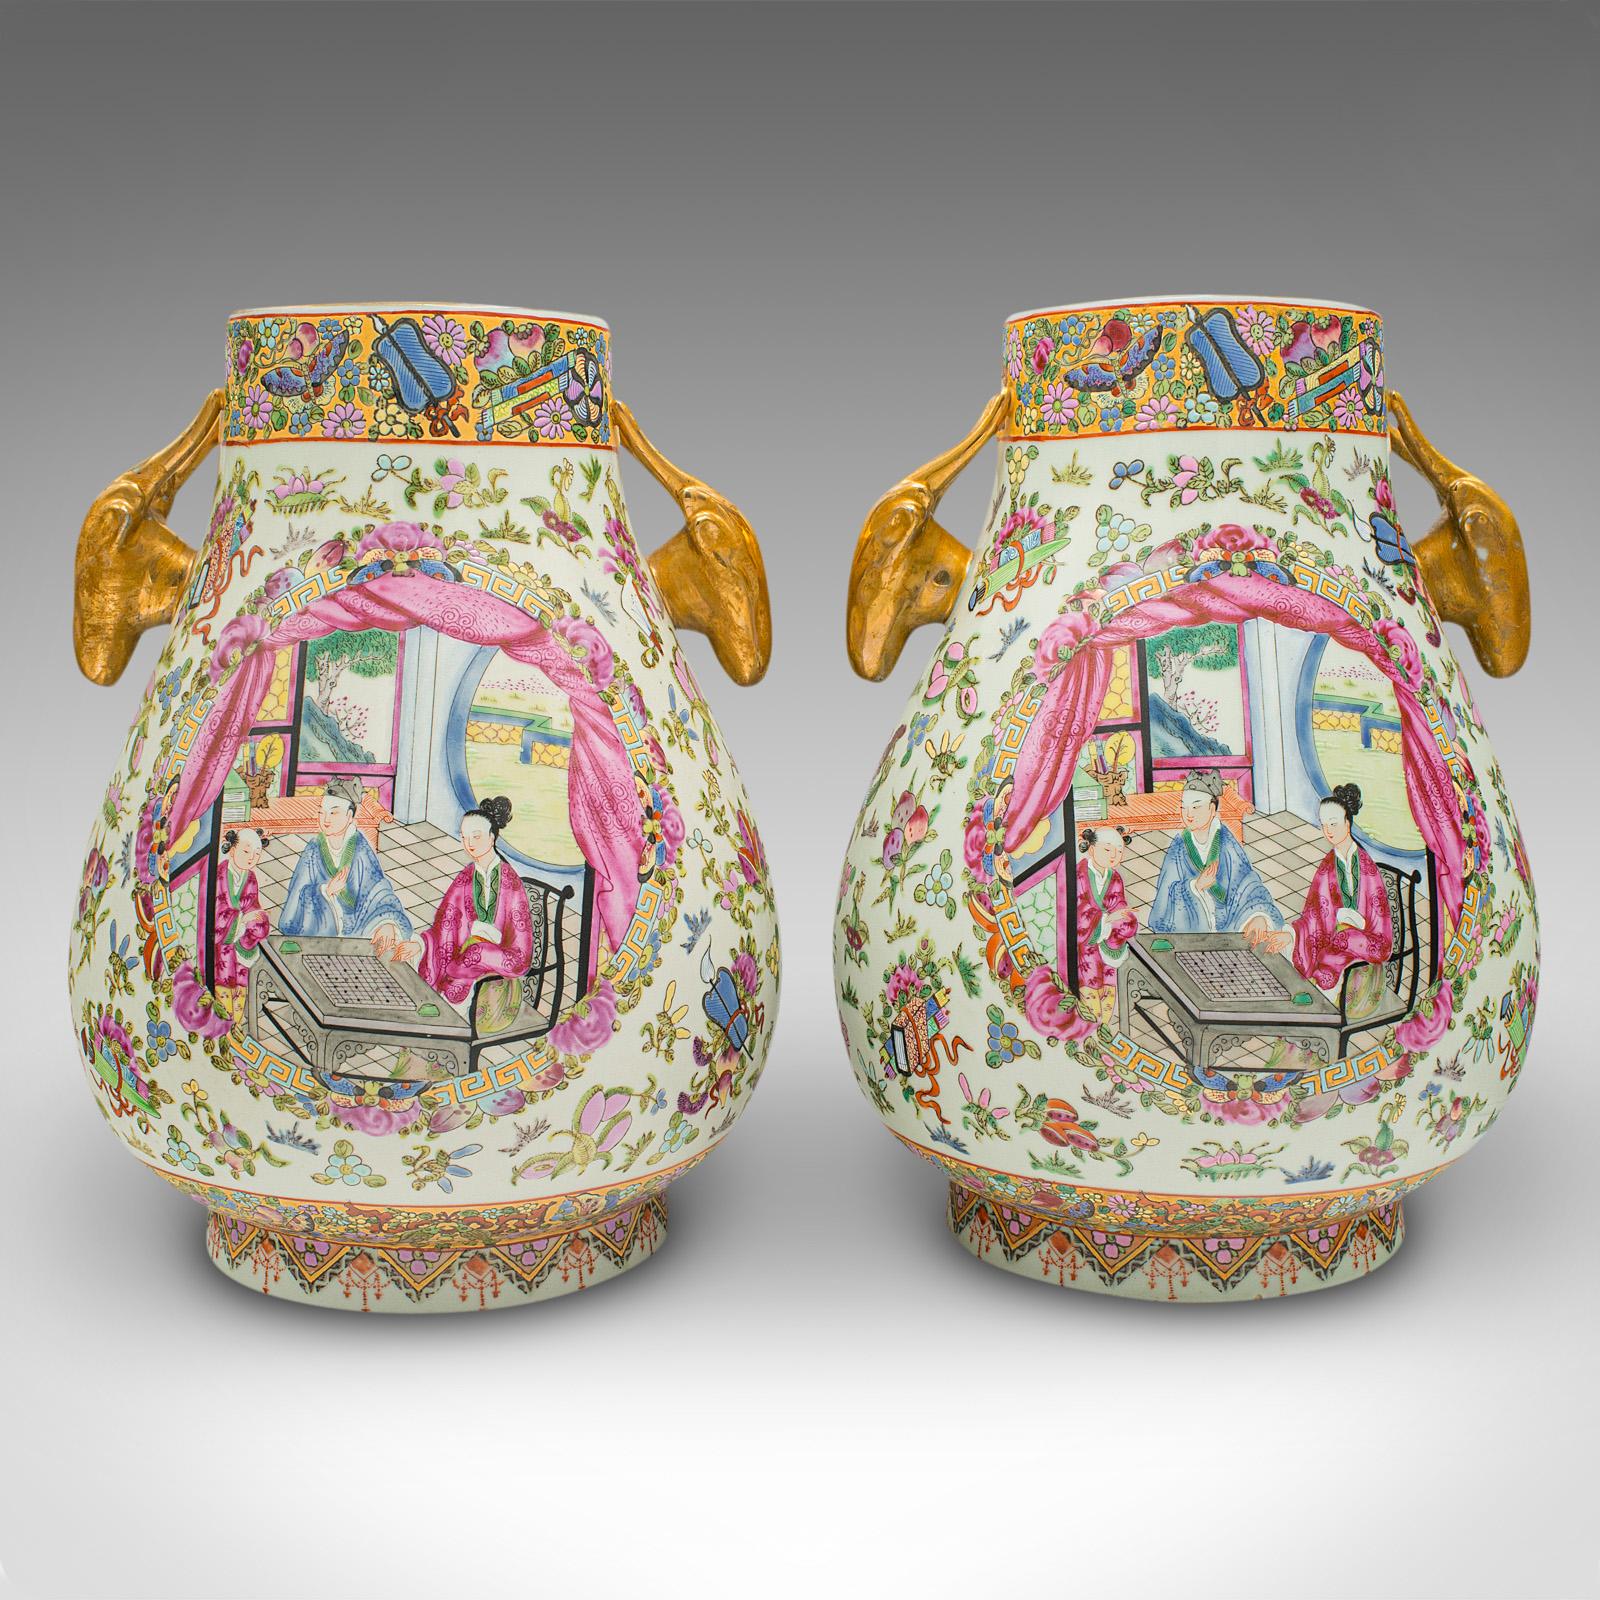 This is a pair of large antique vases. A Chinese, ceramic baluster urn with Famille Rose pattern, dating to the late Victorian period, circa 1900.

Striking pair of antique vases with excellent colour and proportion
Displaying a desirable aged